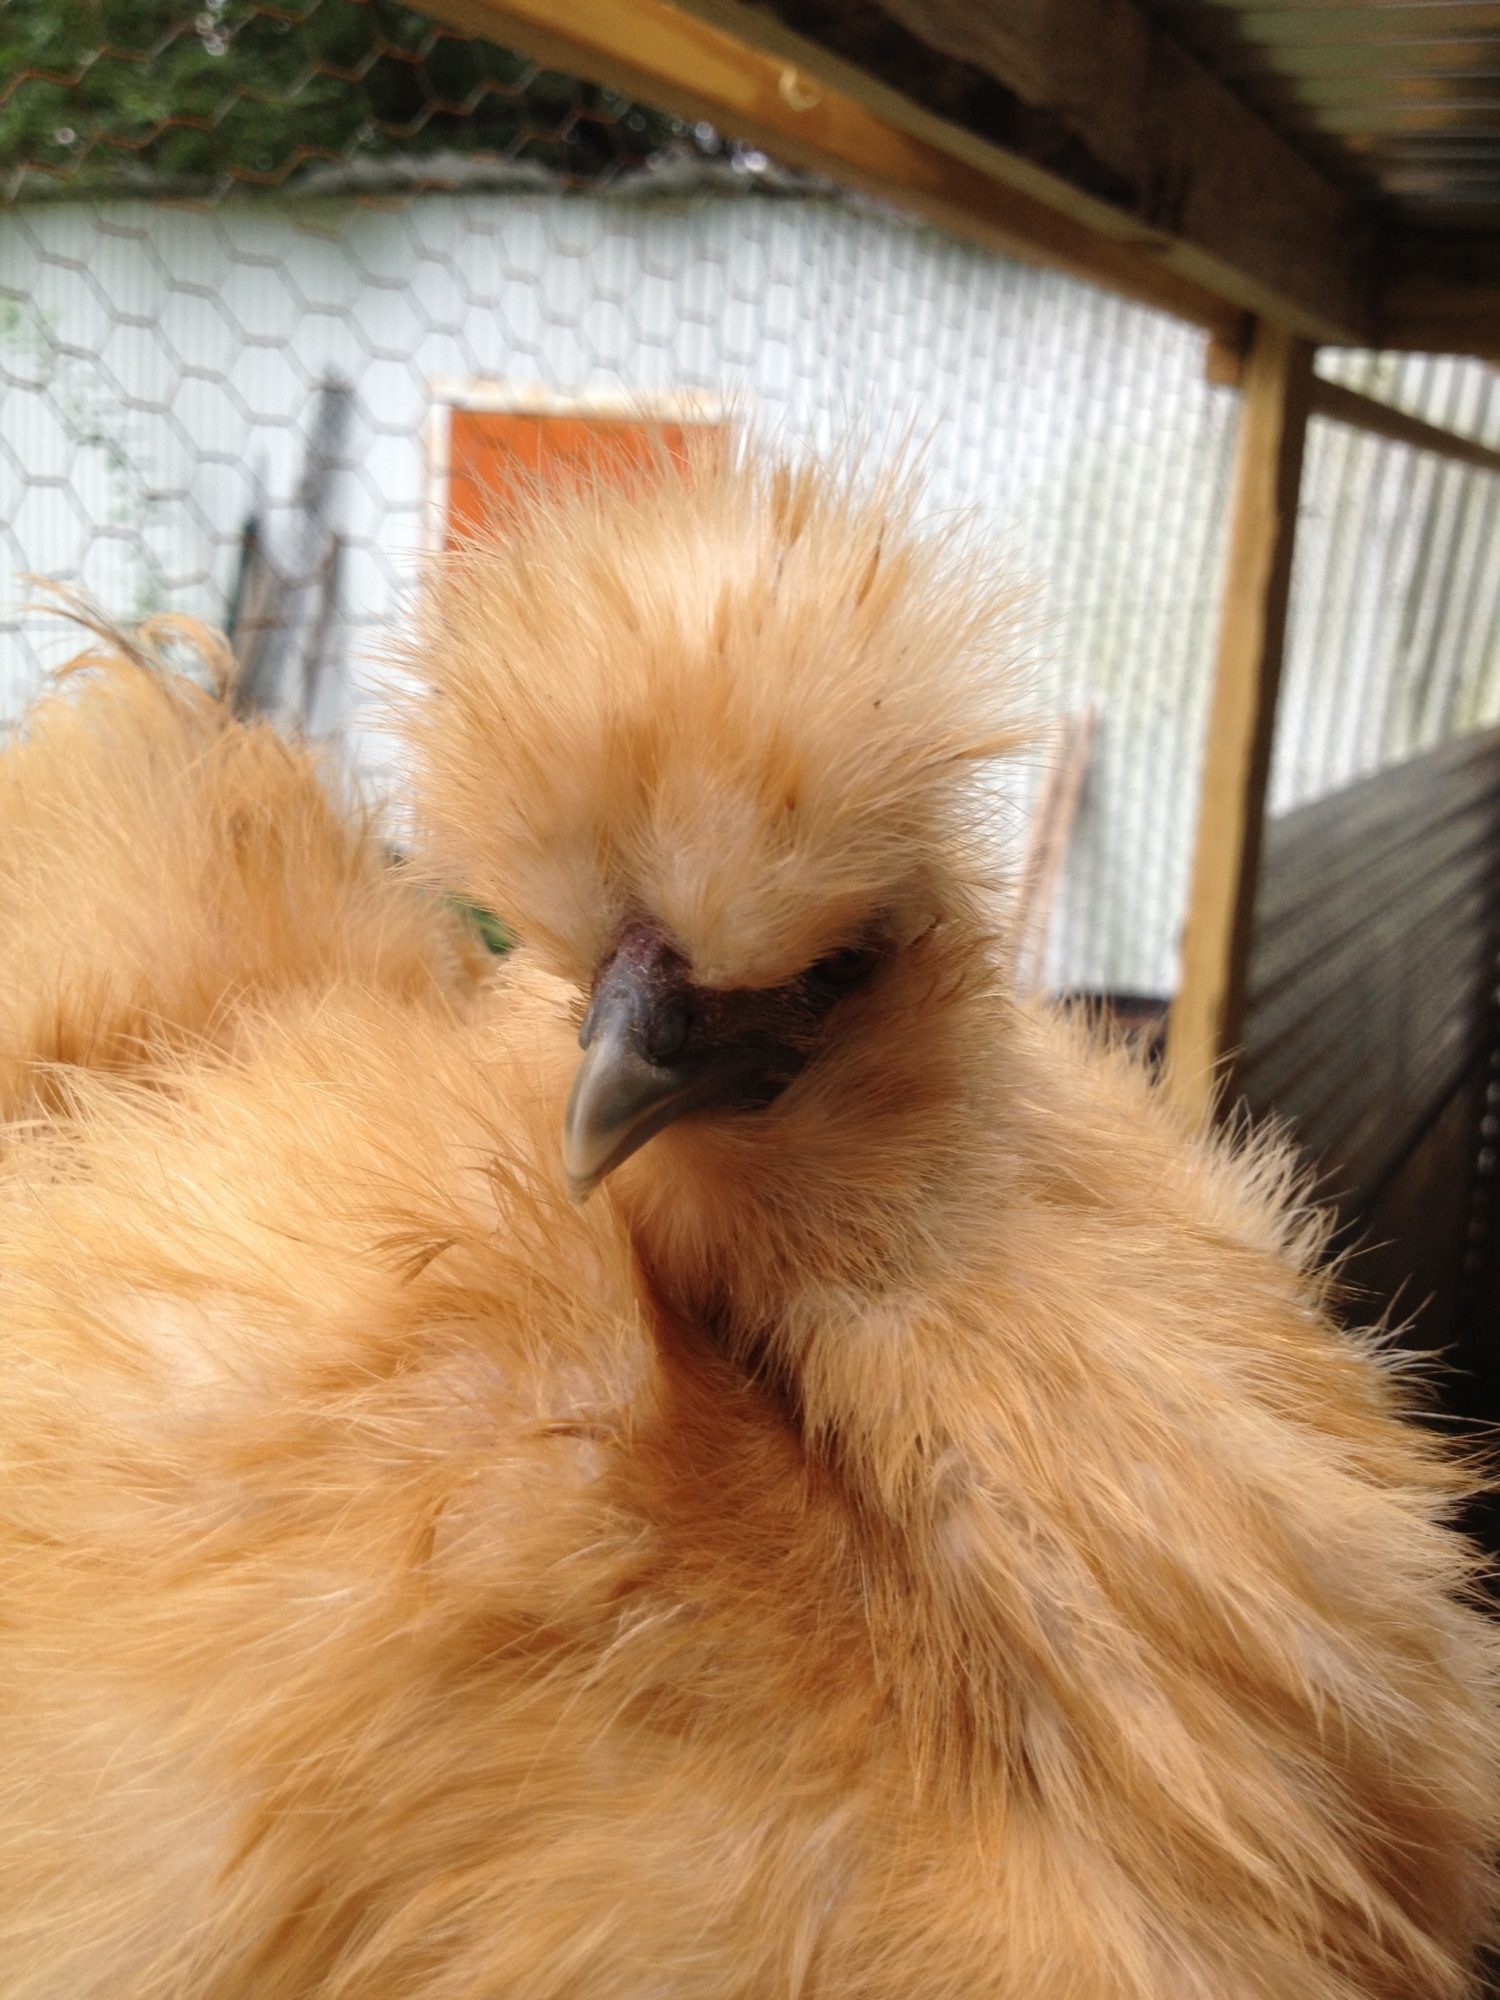 Sexing Silkies Pic Heavy Backyard Chickens Learn How To Raise Chickens